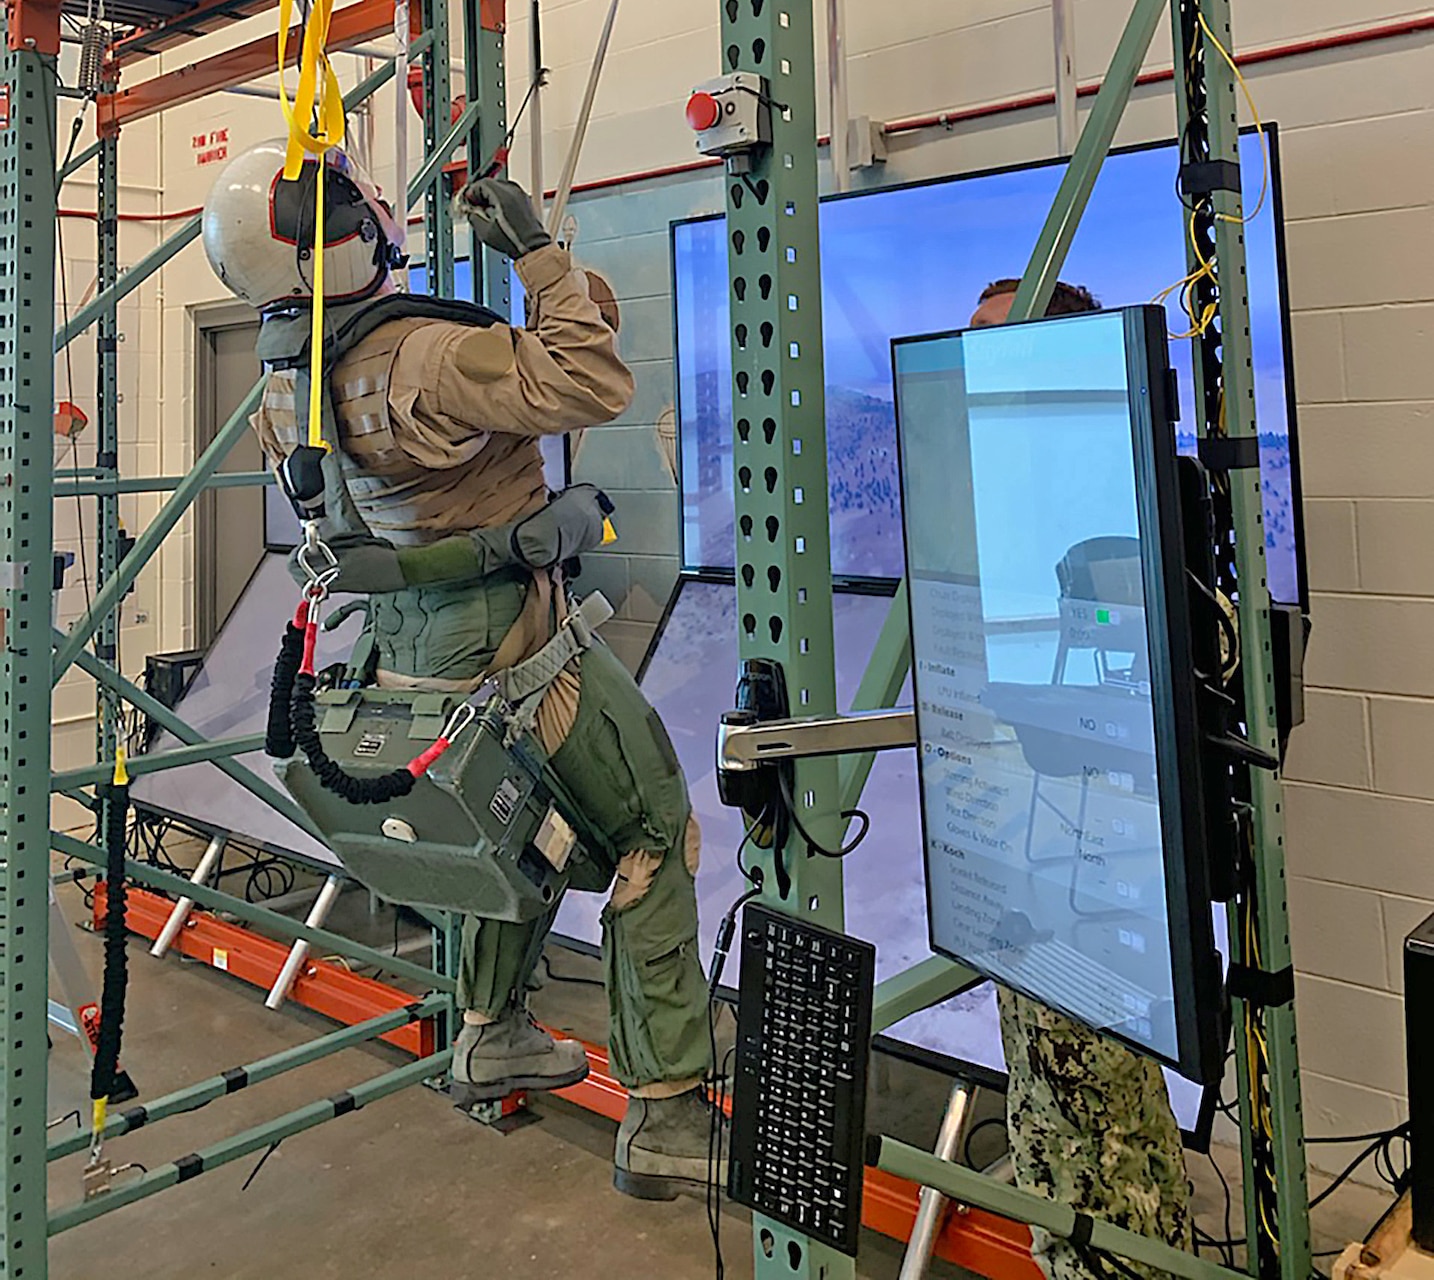 A student performs corrective action in response to a parachute malfunction during training at Aviation Survival Training Center (ASTC) Pensacola, Florida.